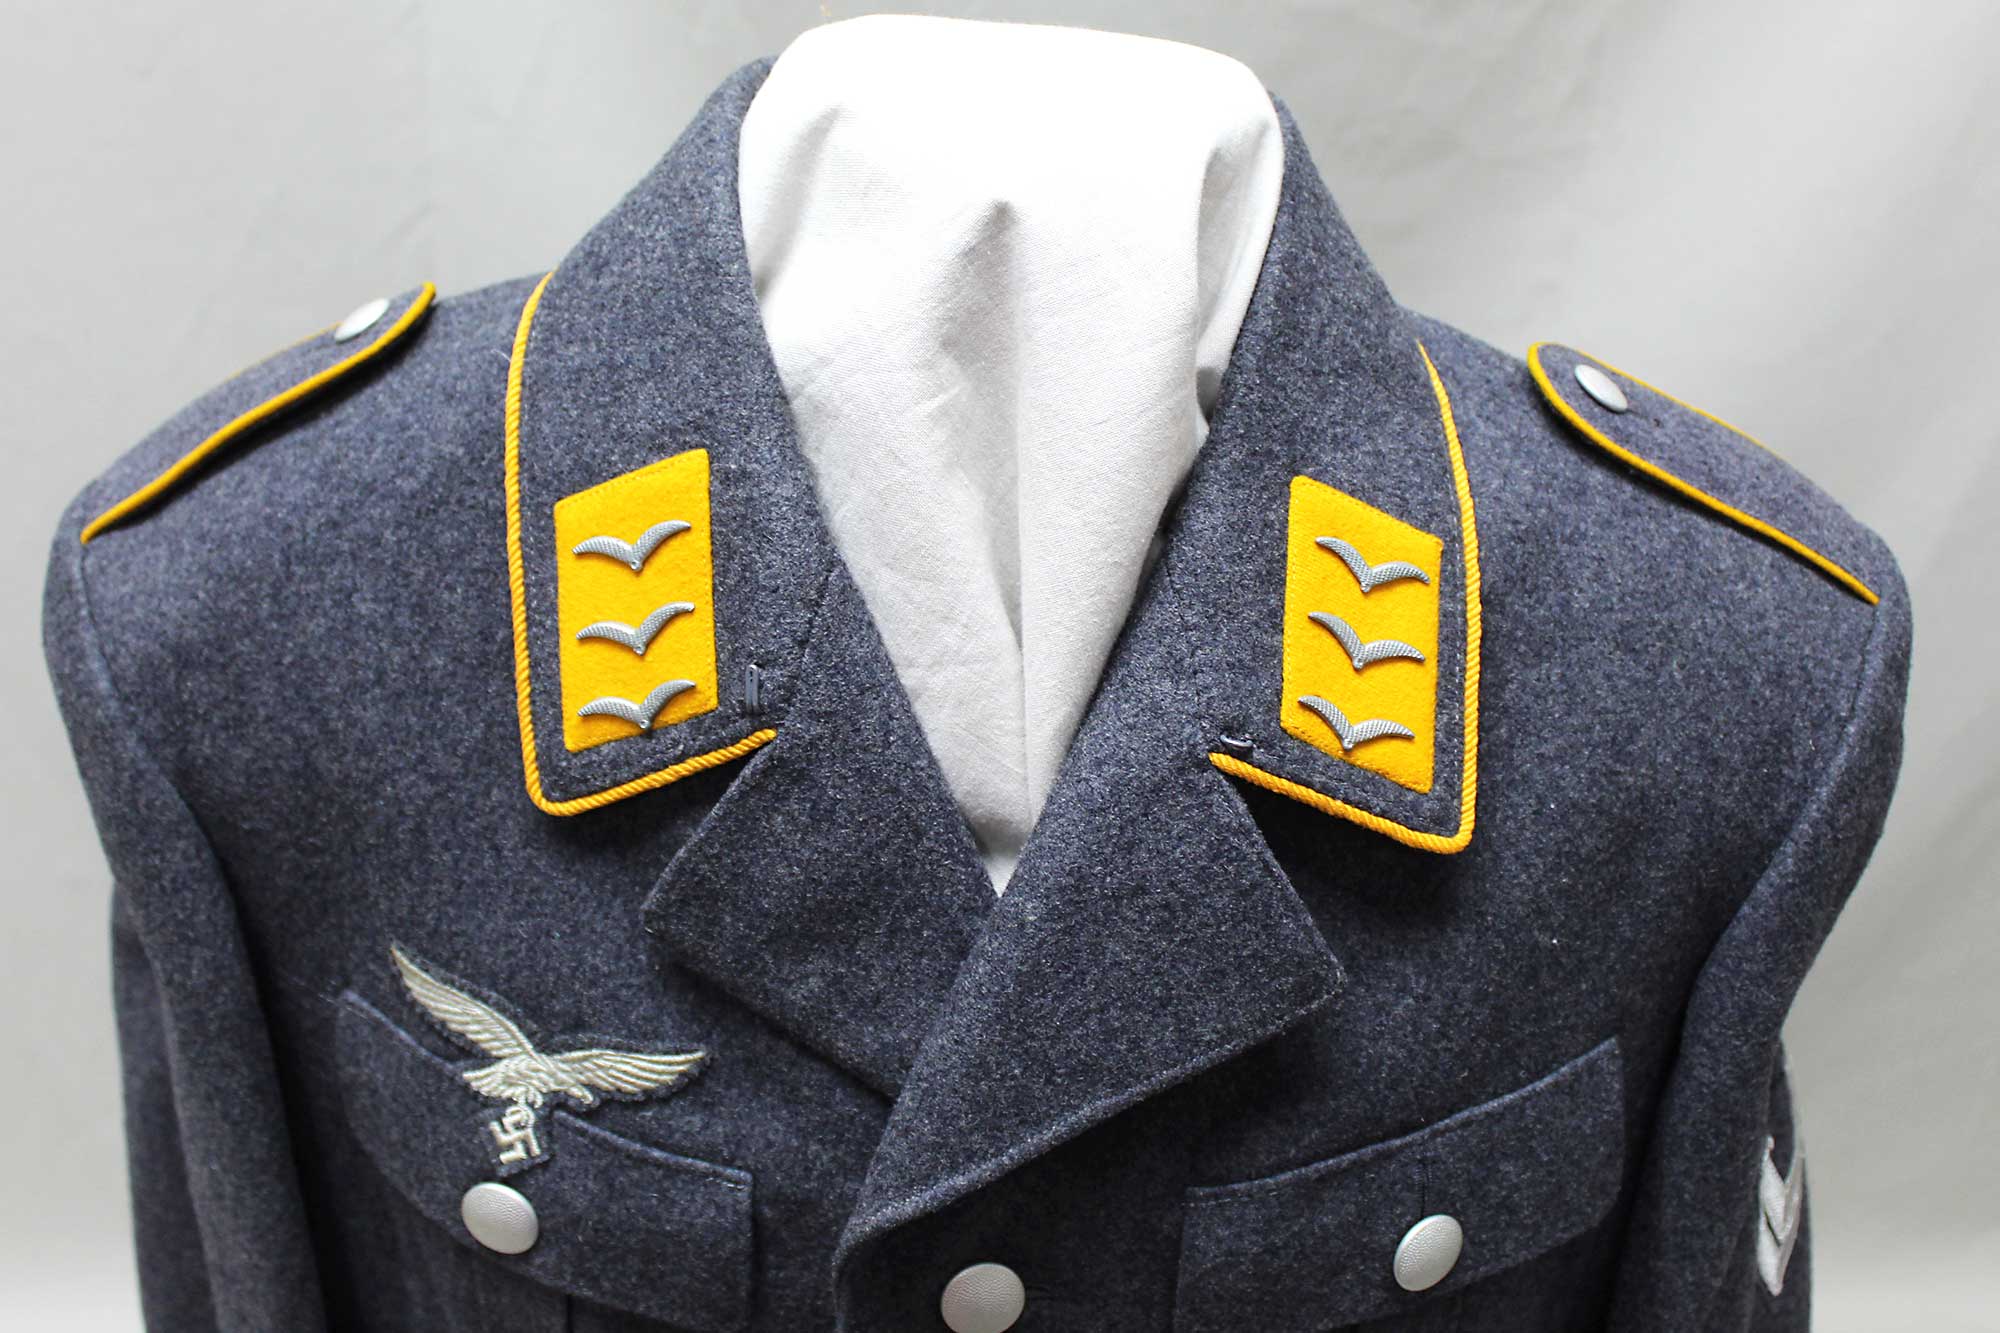 Buy WWII Luftwaffe Late War Colors online for16,50€